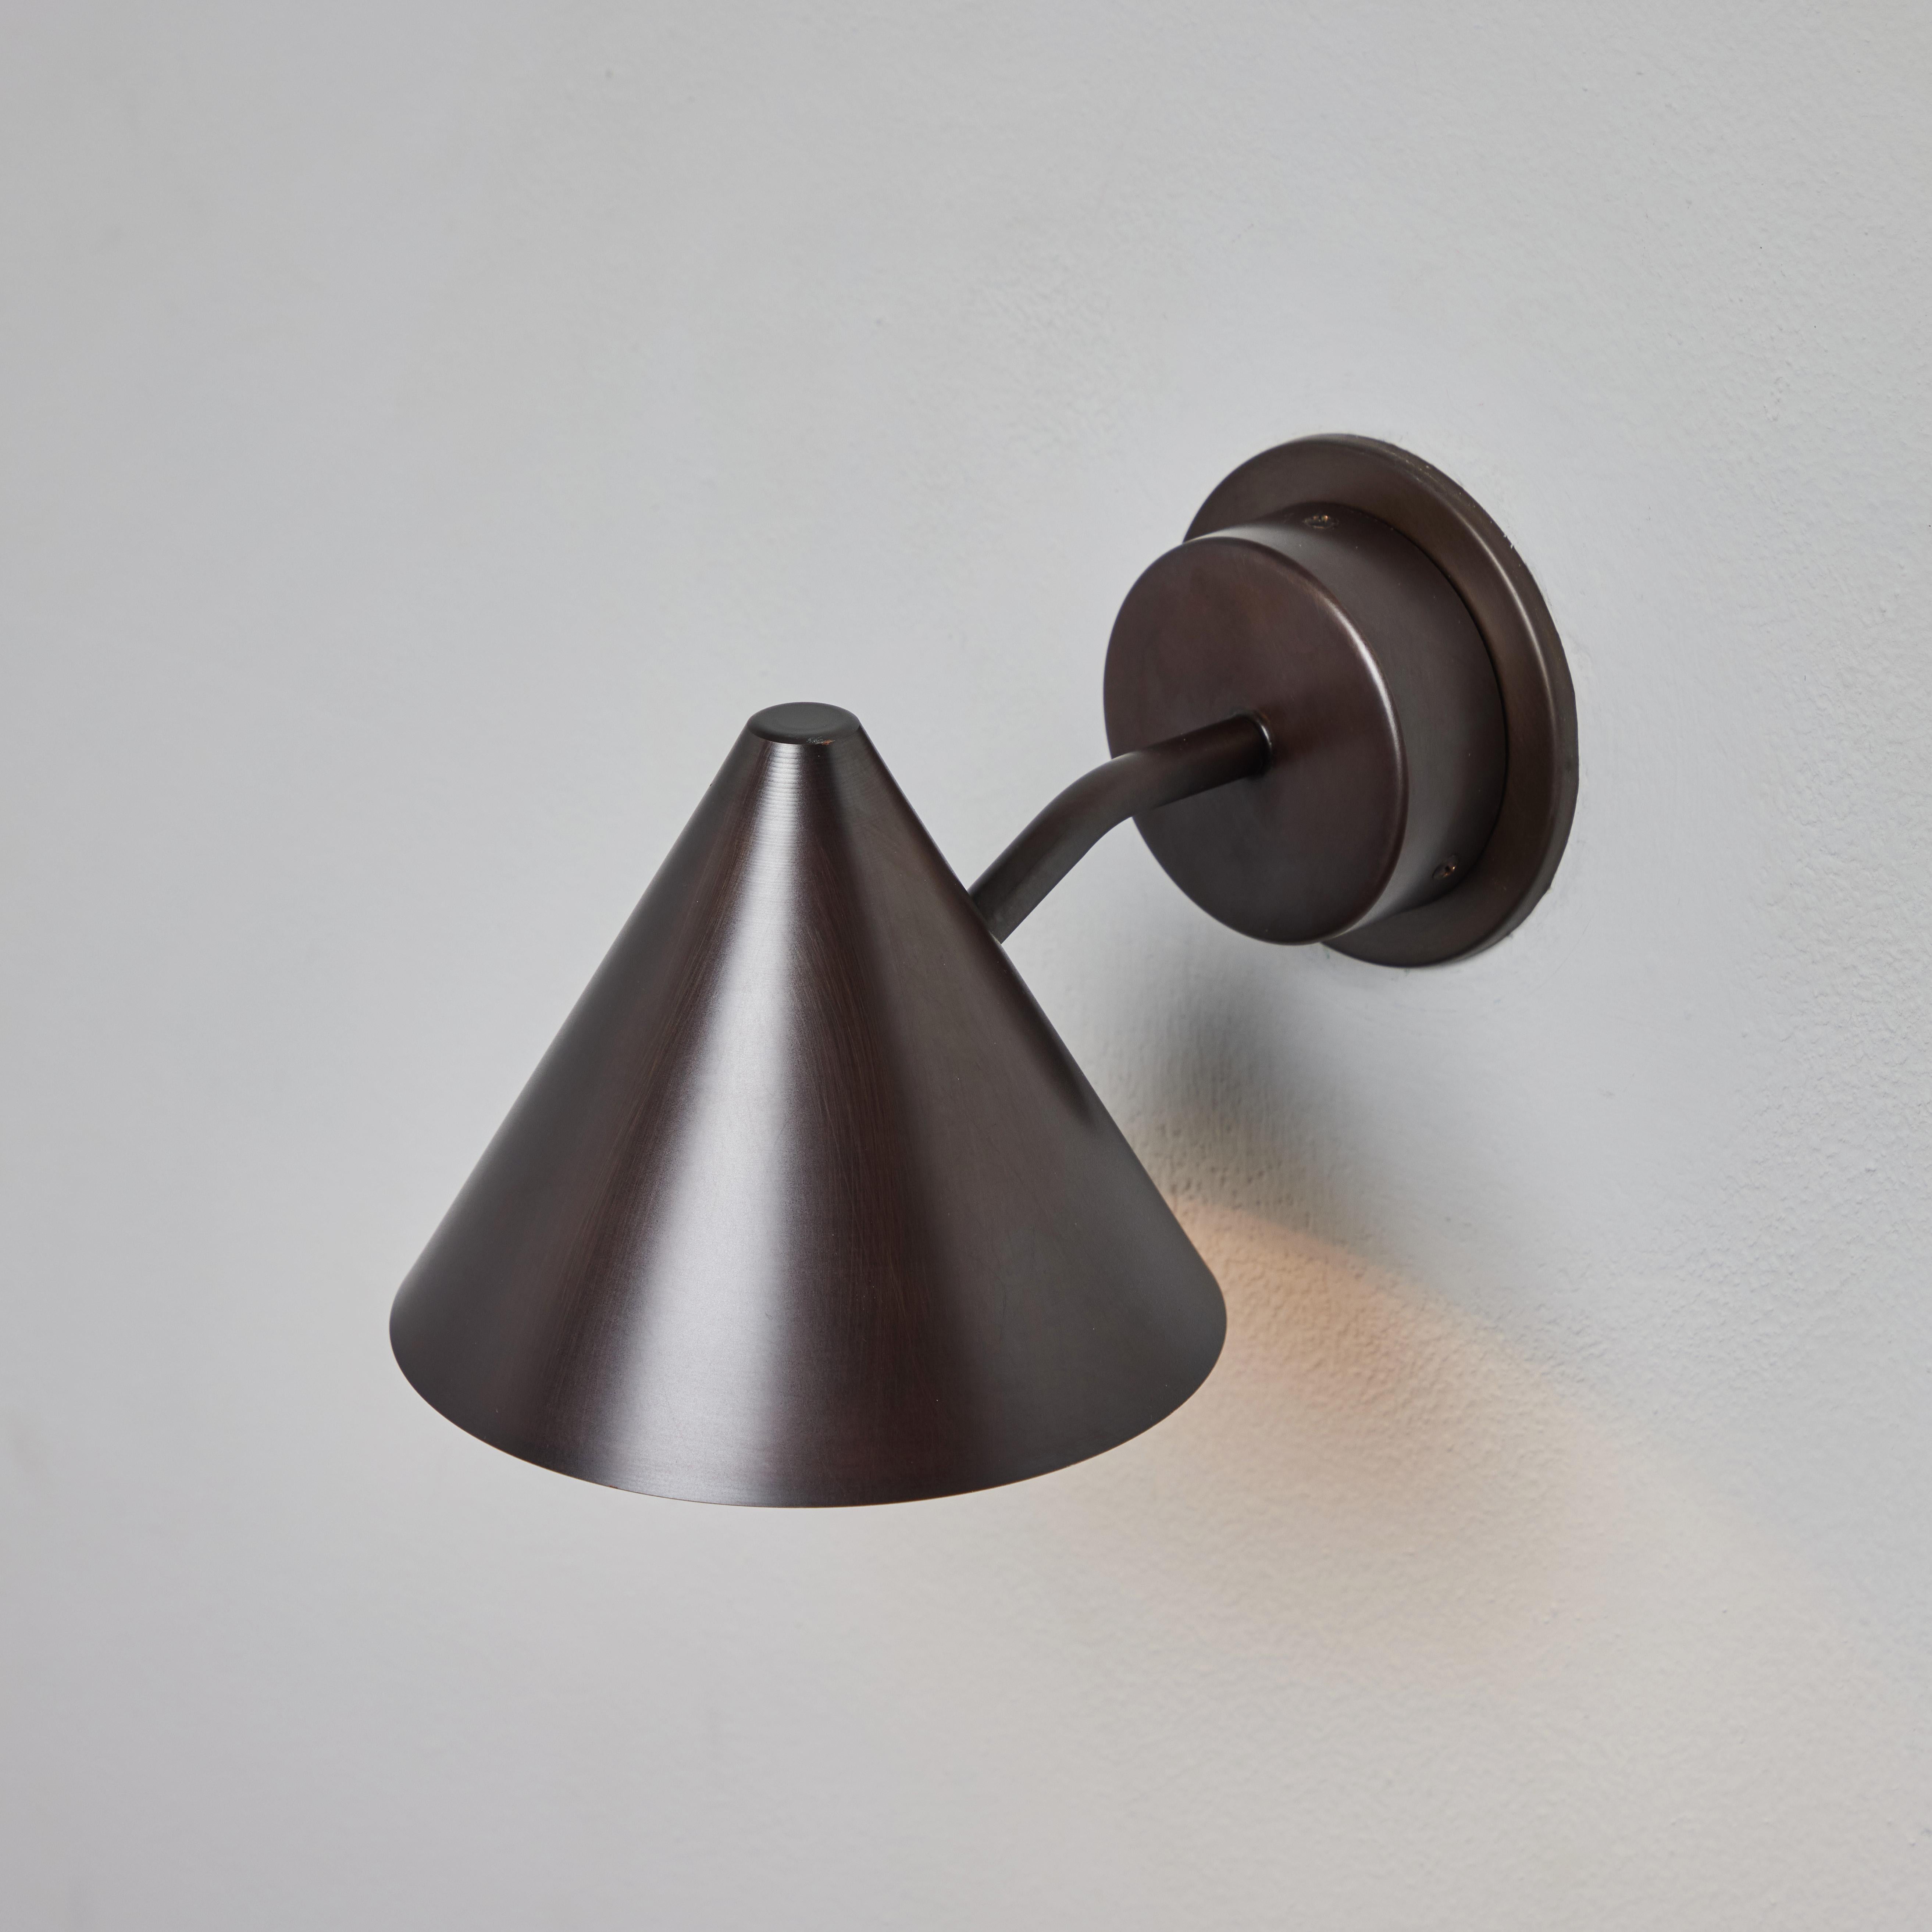 Hans-Agne Jakobsson 'Mini-Tratten' Dark Brown Patinated Outdoor Sconce For Sale 6